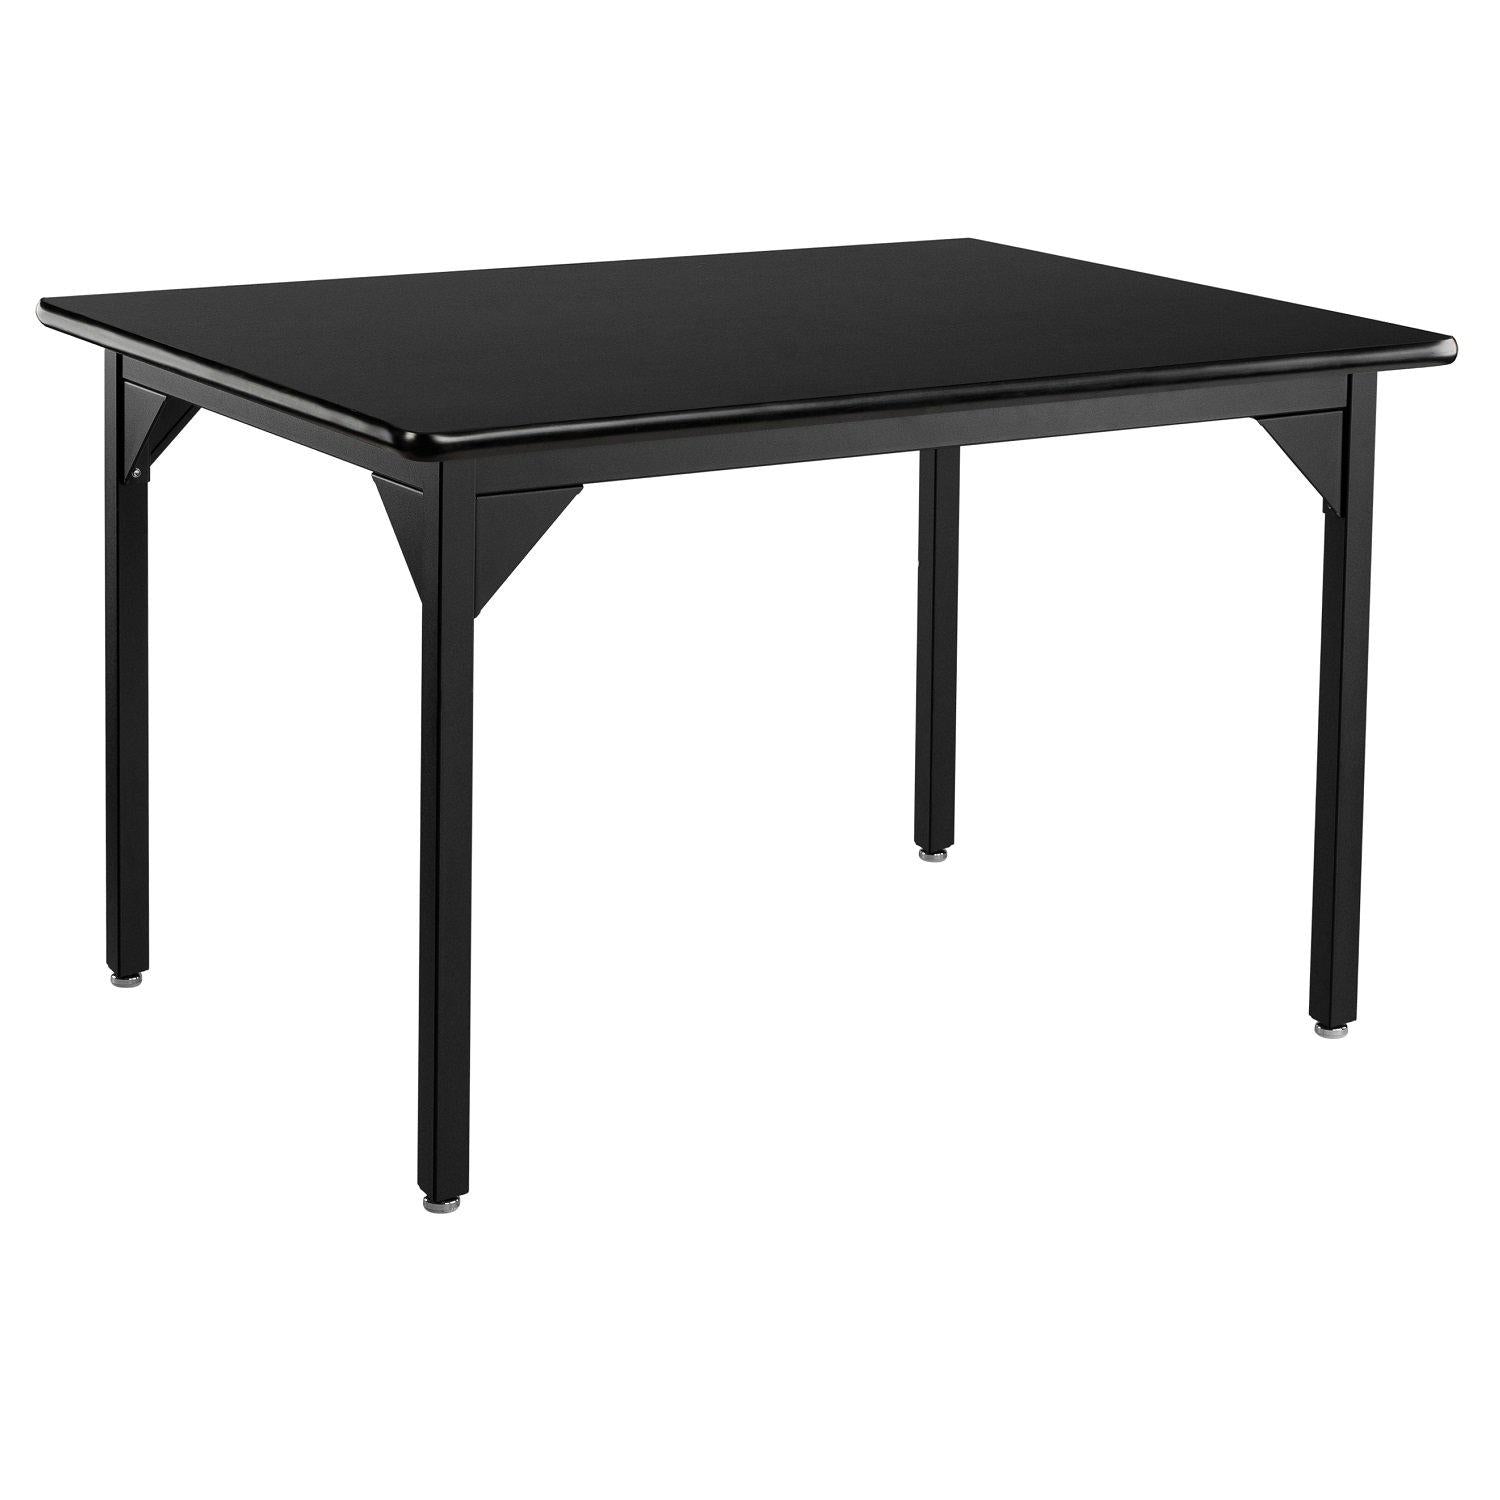 Heavy-Duty Fixed Height Utility Table, Black Frame, 36" x 60", High-Pressure Laminate Top with T-Mold Edge